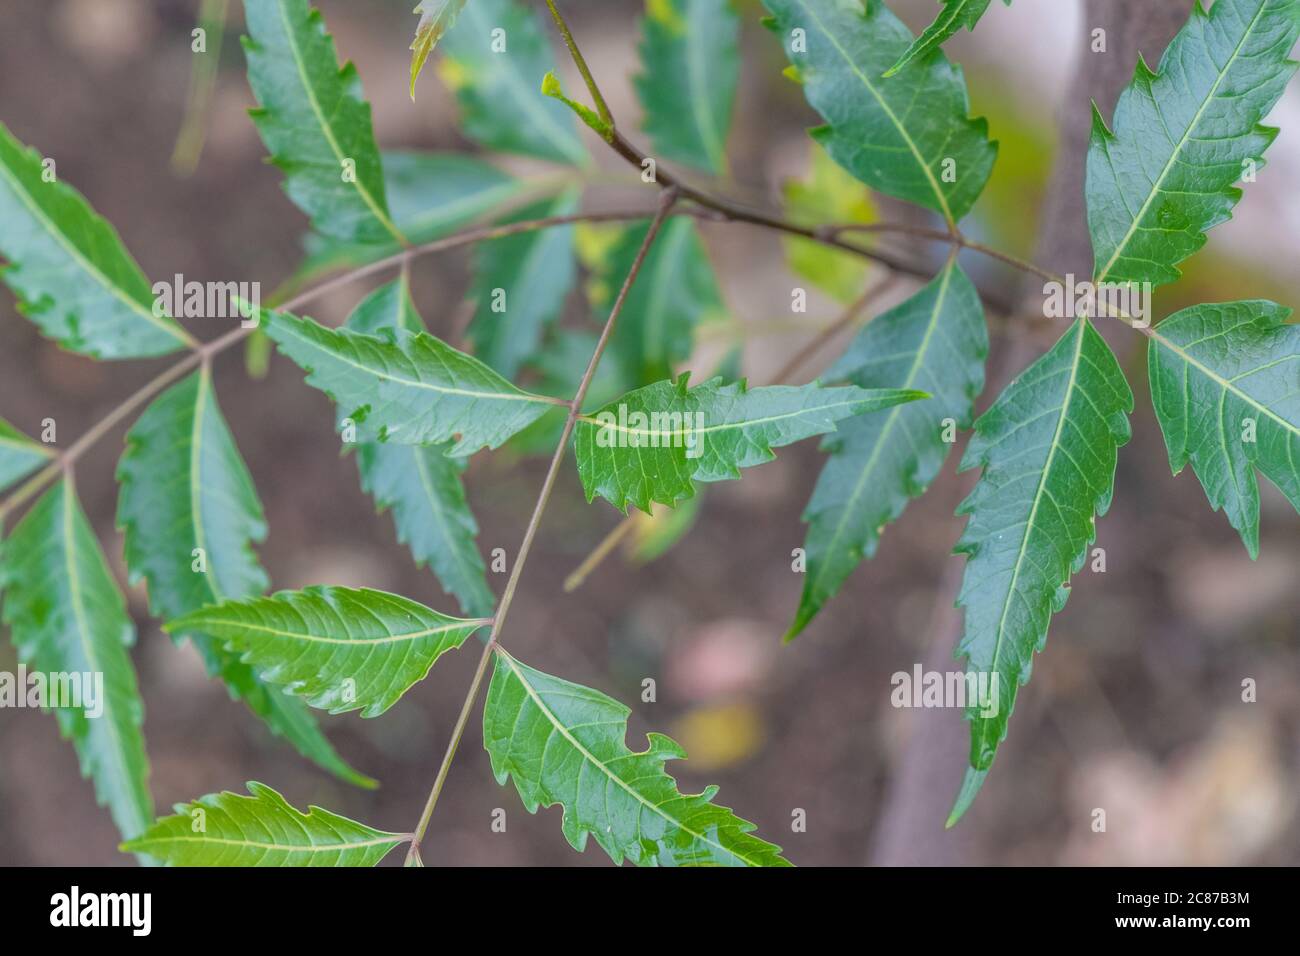 Azadirachta or neem tree leafs,  nimtree or Indian lilac. also know as ayurvedic medicine Stock Photo